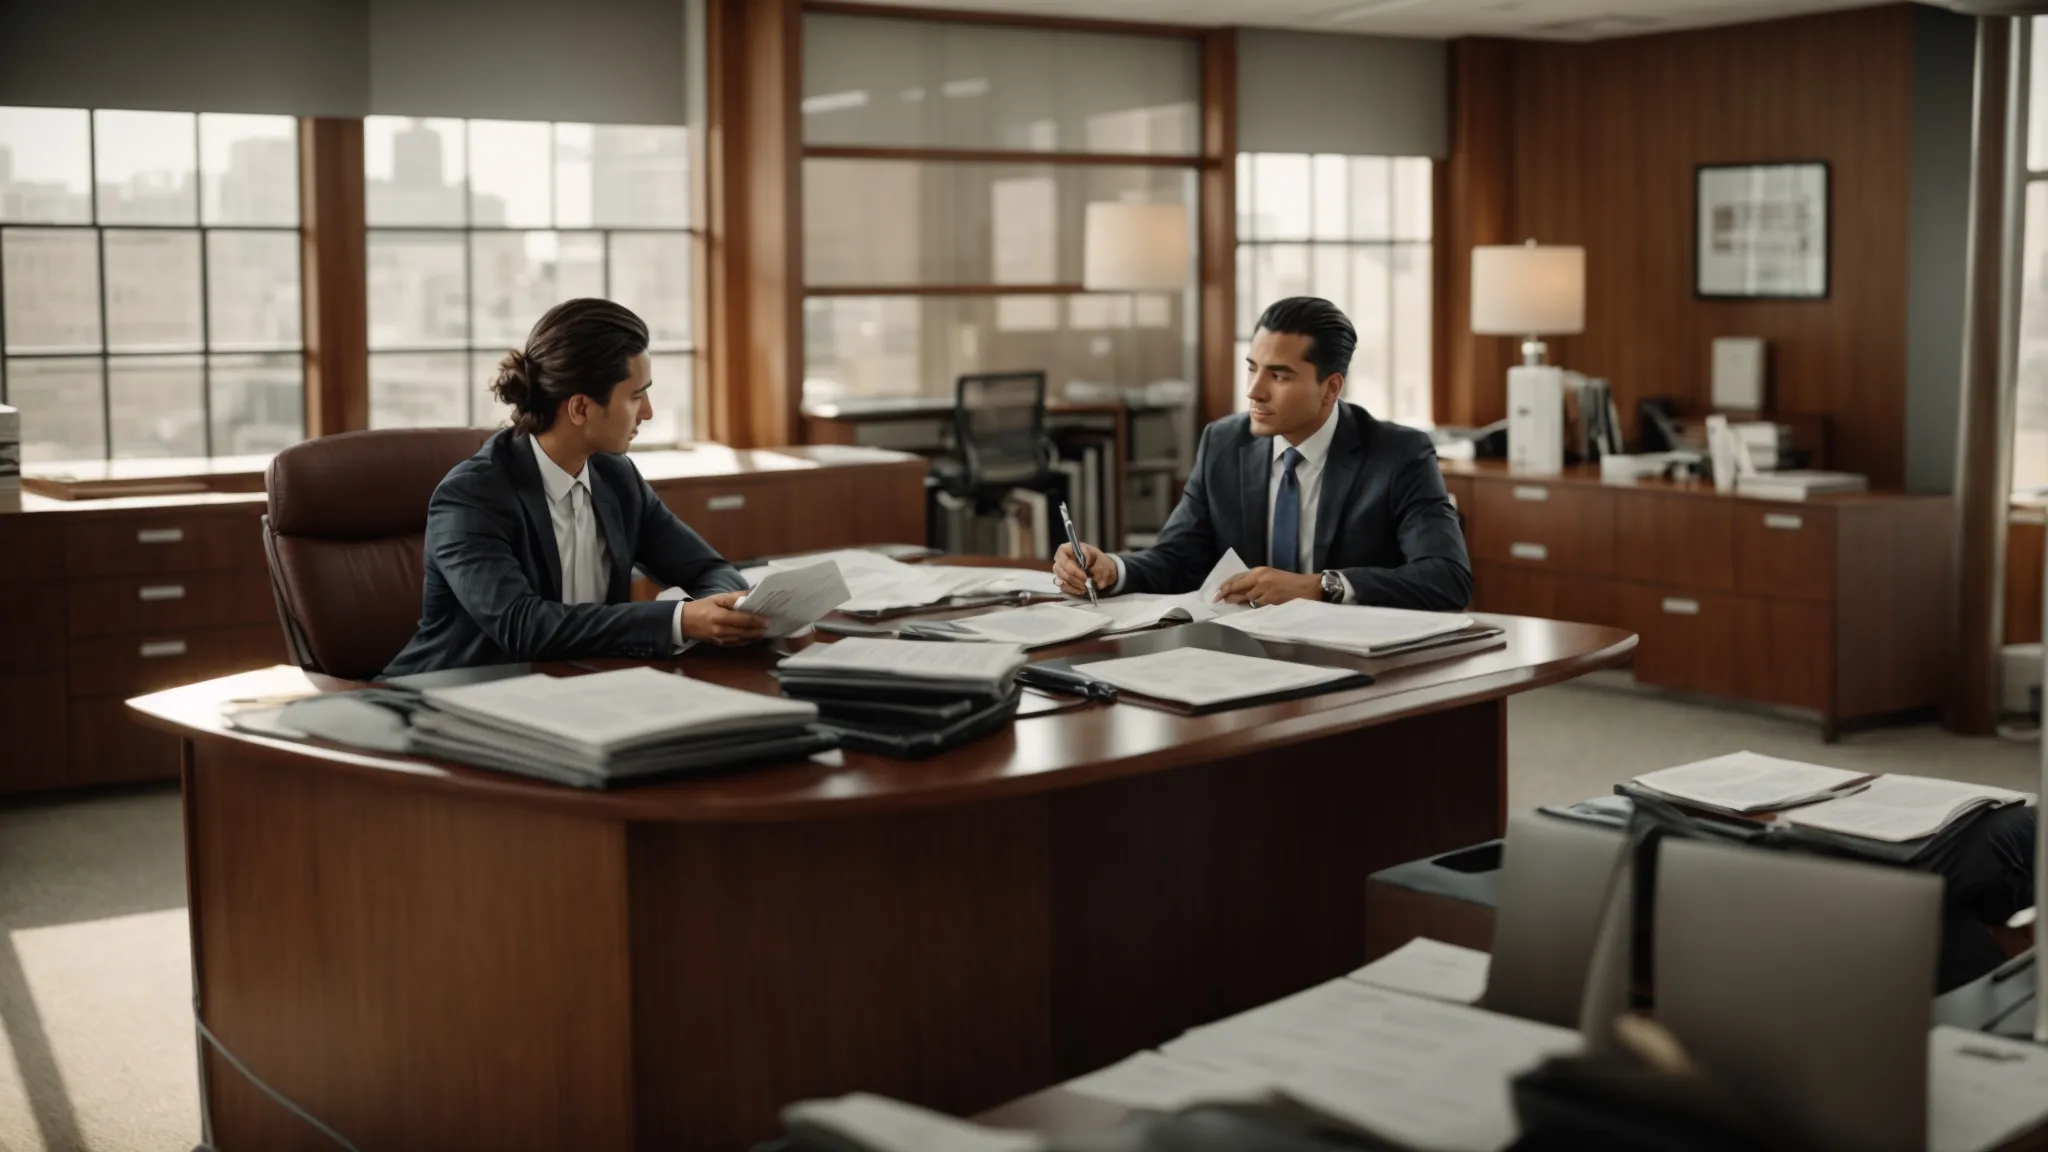 a business owner and an attorney sit across from each other at a large, organized desk in a well-lit office, discussing documents spread out in front of them.